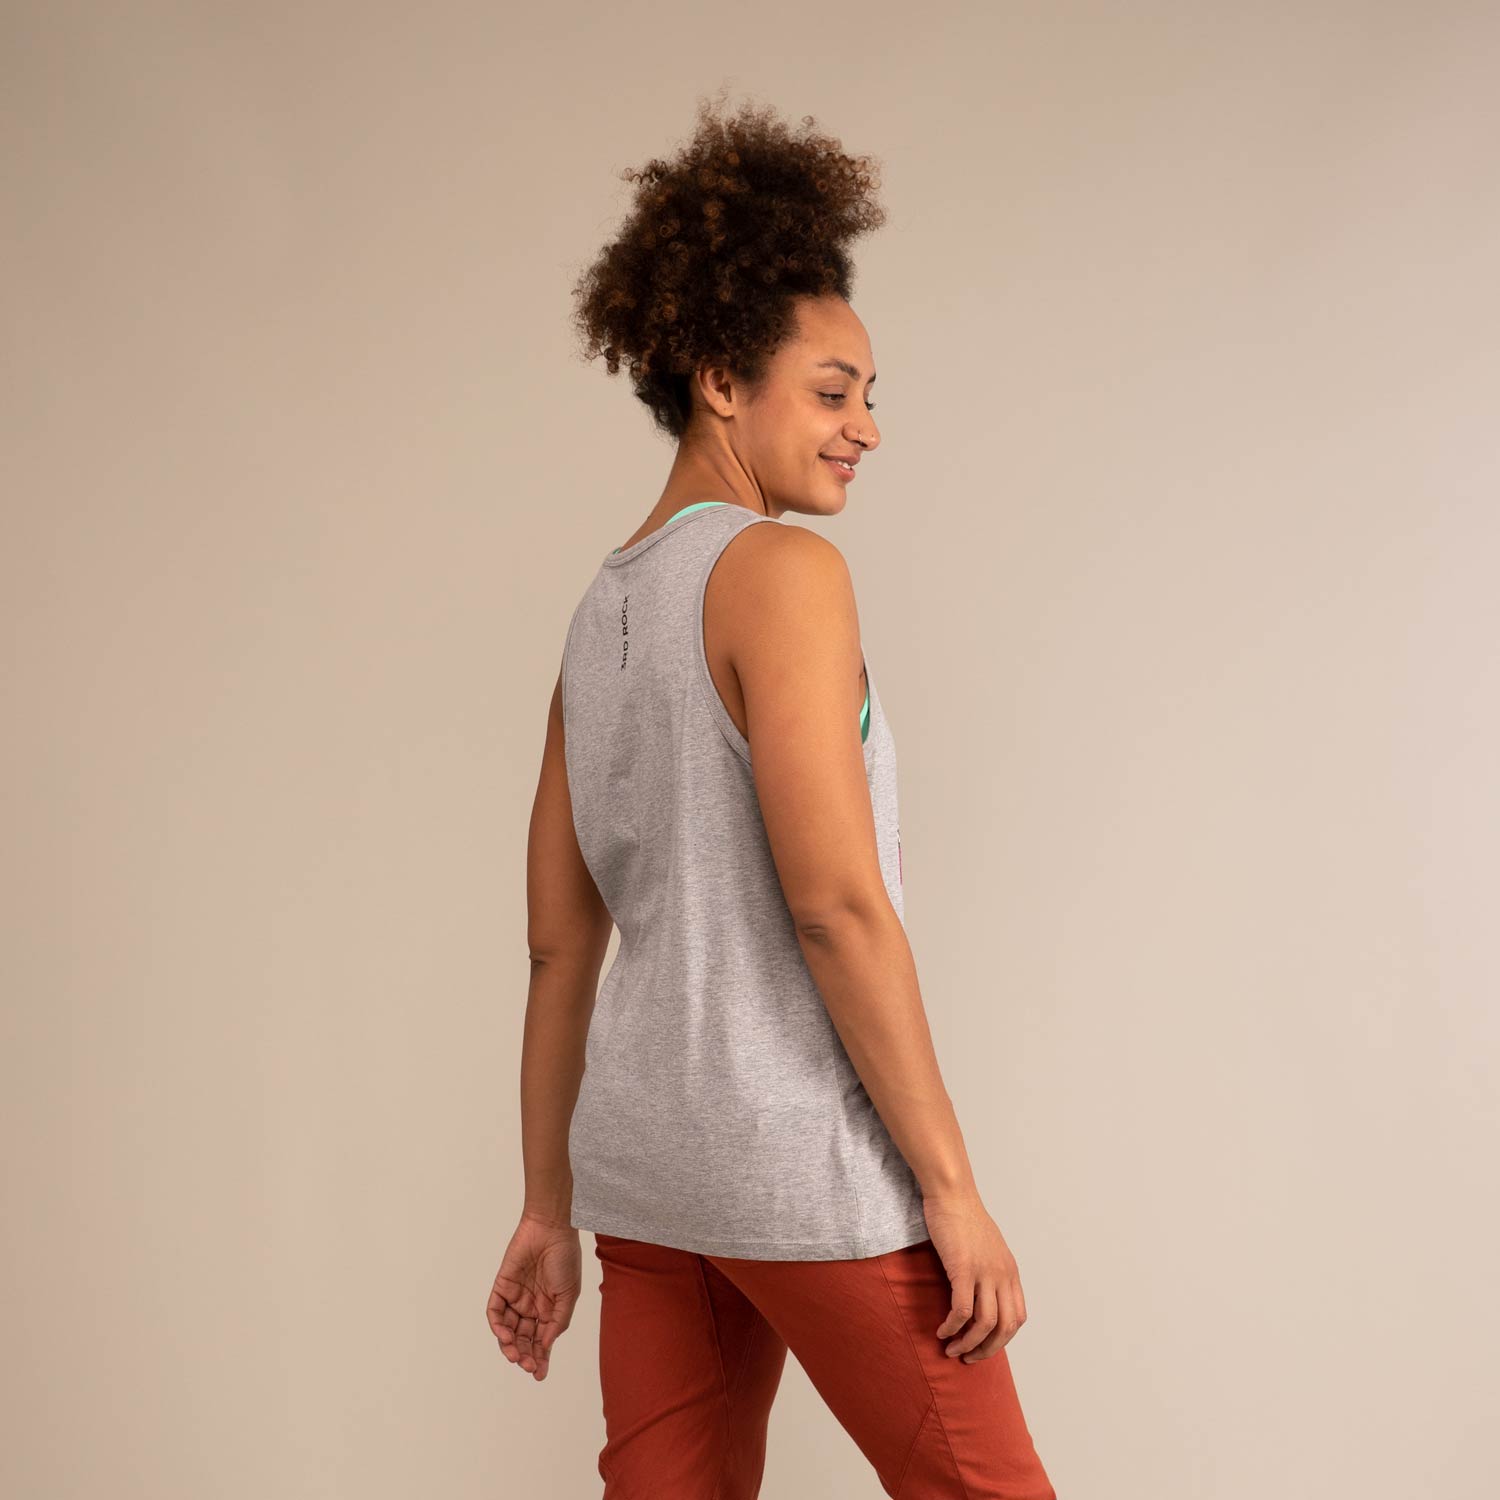 EARTHLOVER VEST | Organic Cotton Comfort Vest | 3RD ROCK Clothing -  Kendal is 5ft 8 with a 36" bust and wears a size M F